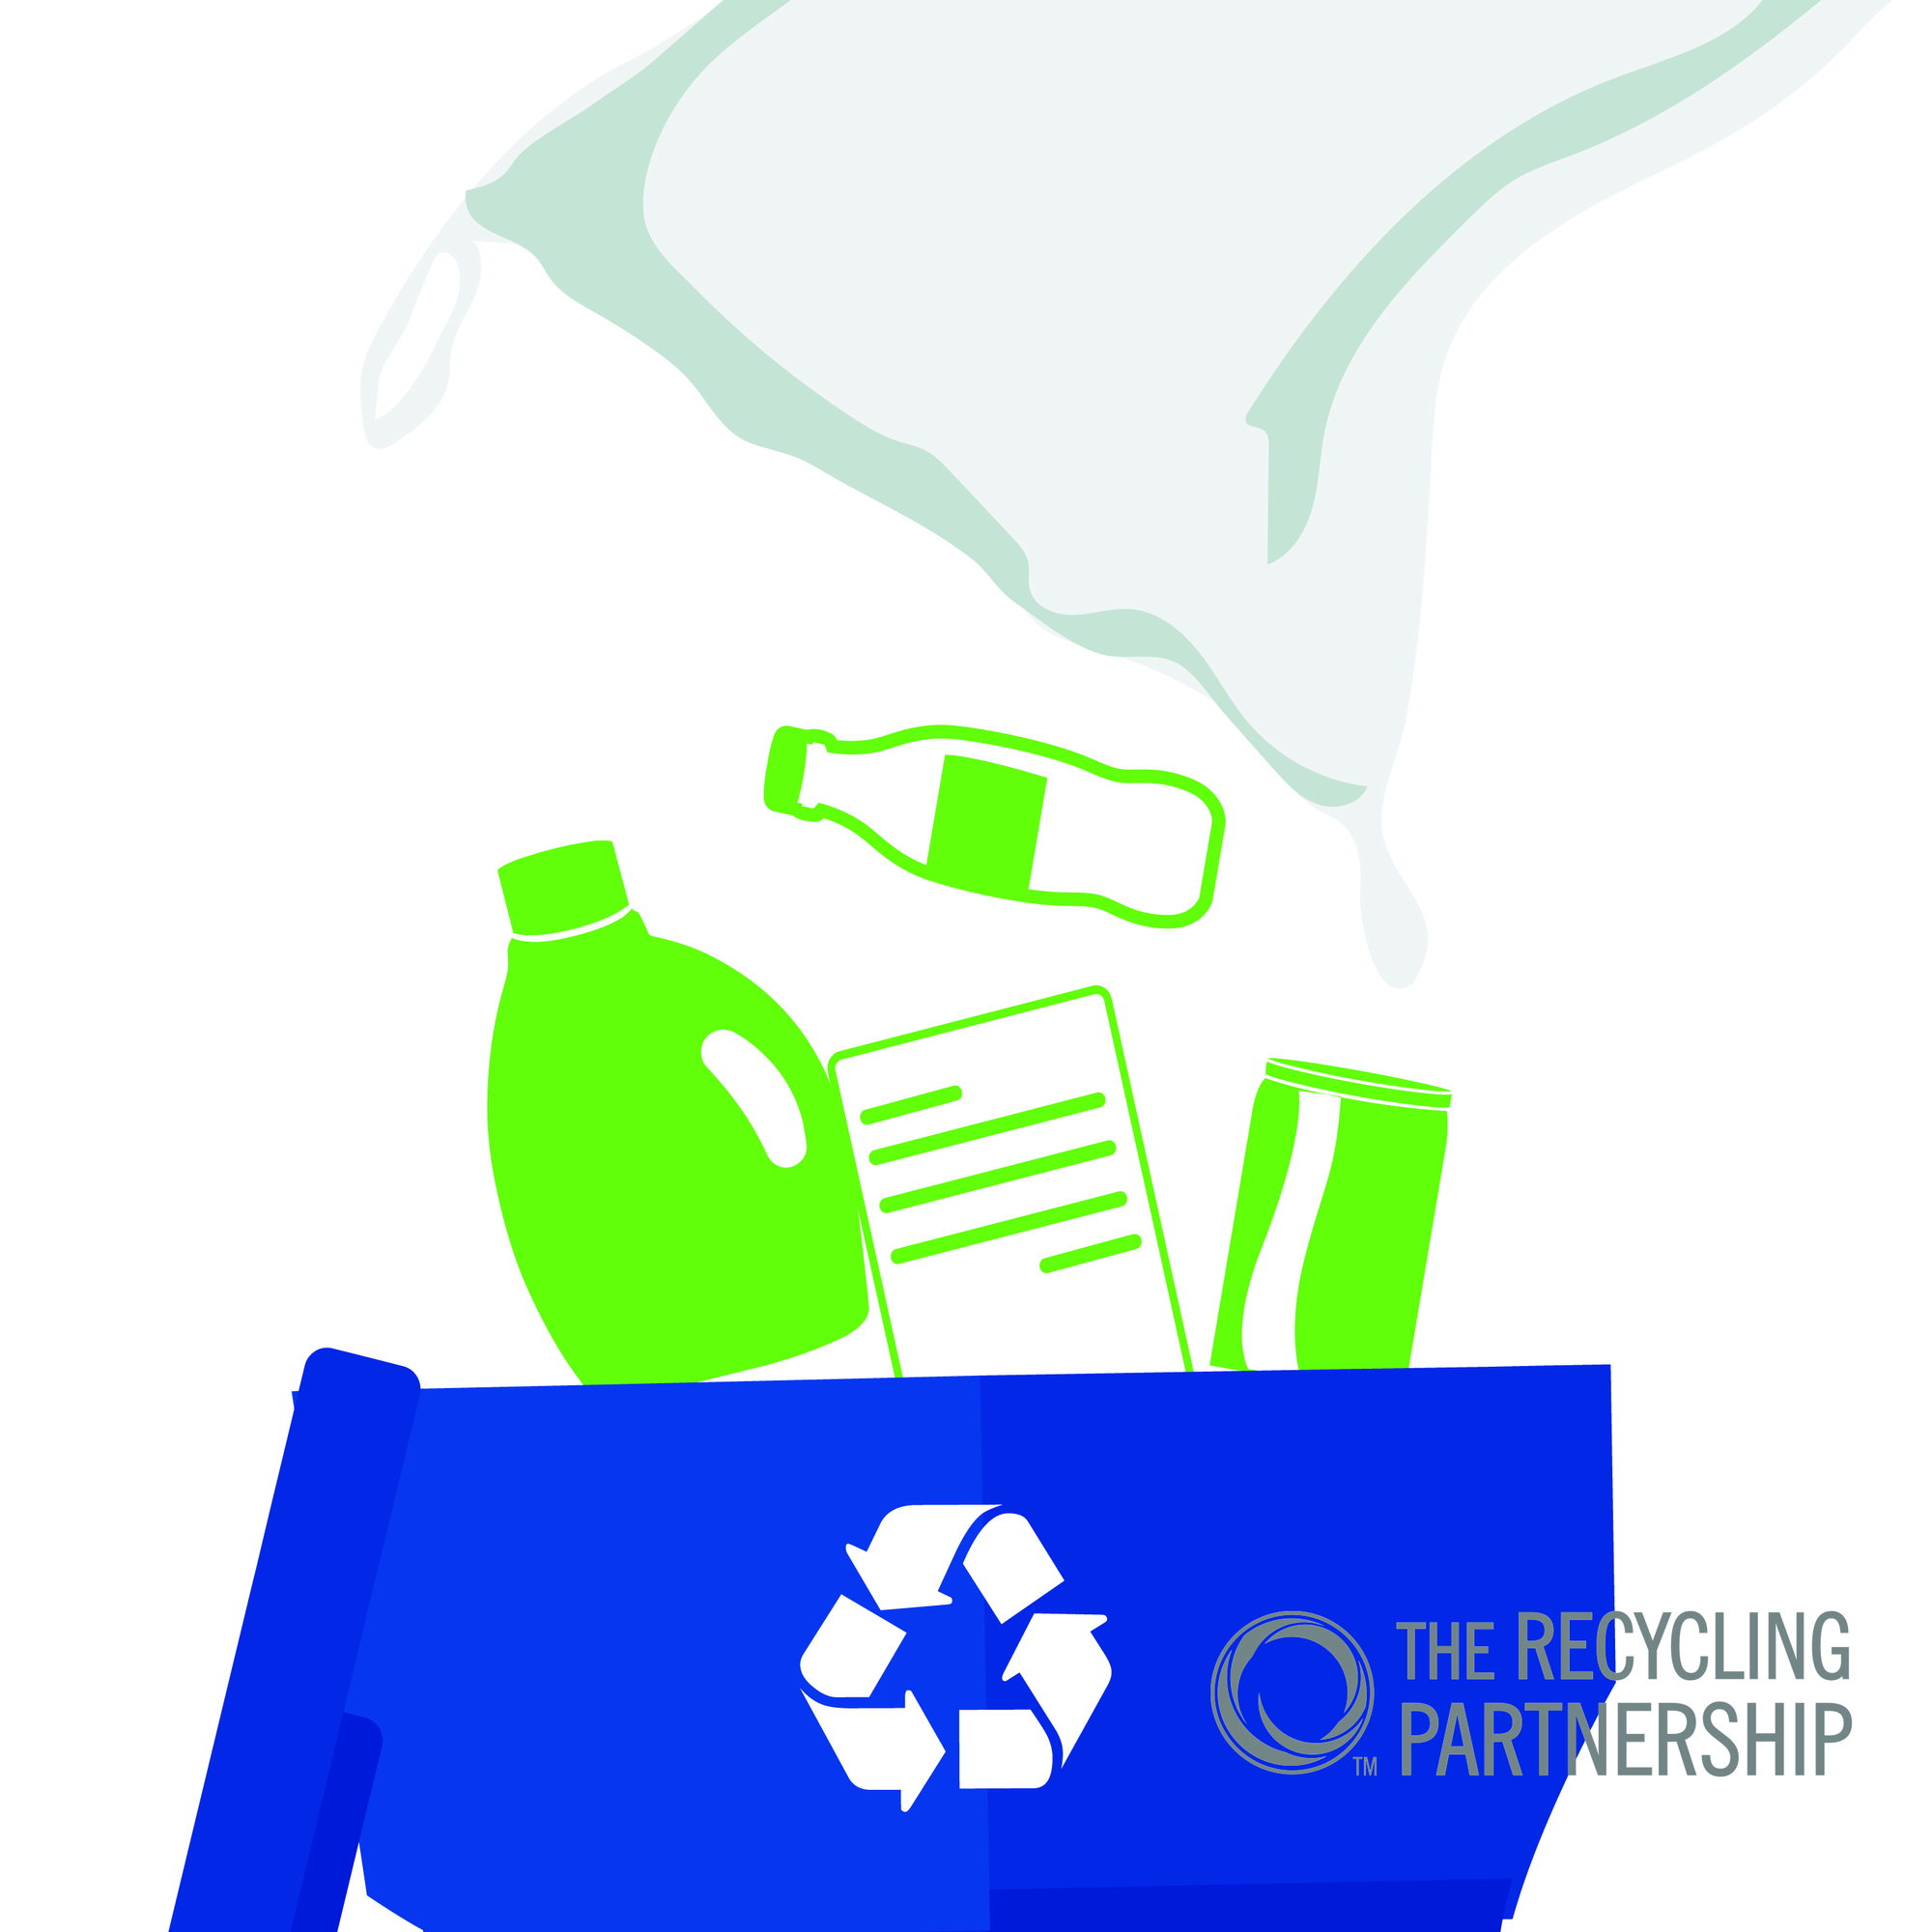 image showing not to bag your recyclables and to empty them into your recycling cart loose